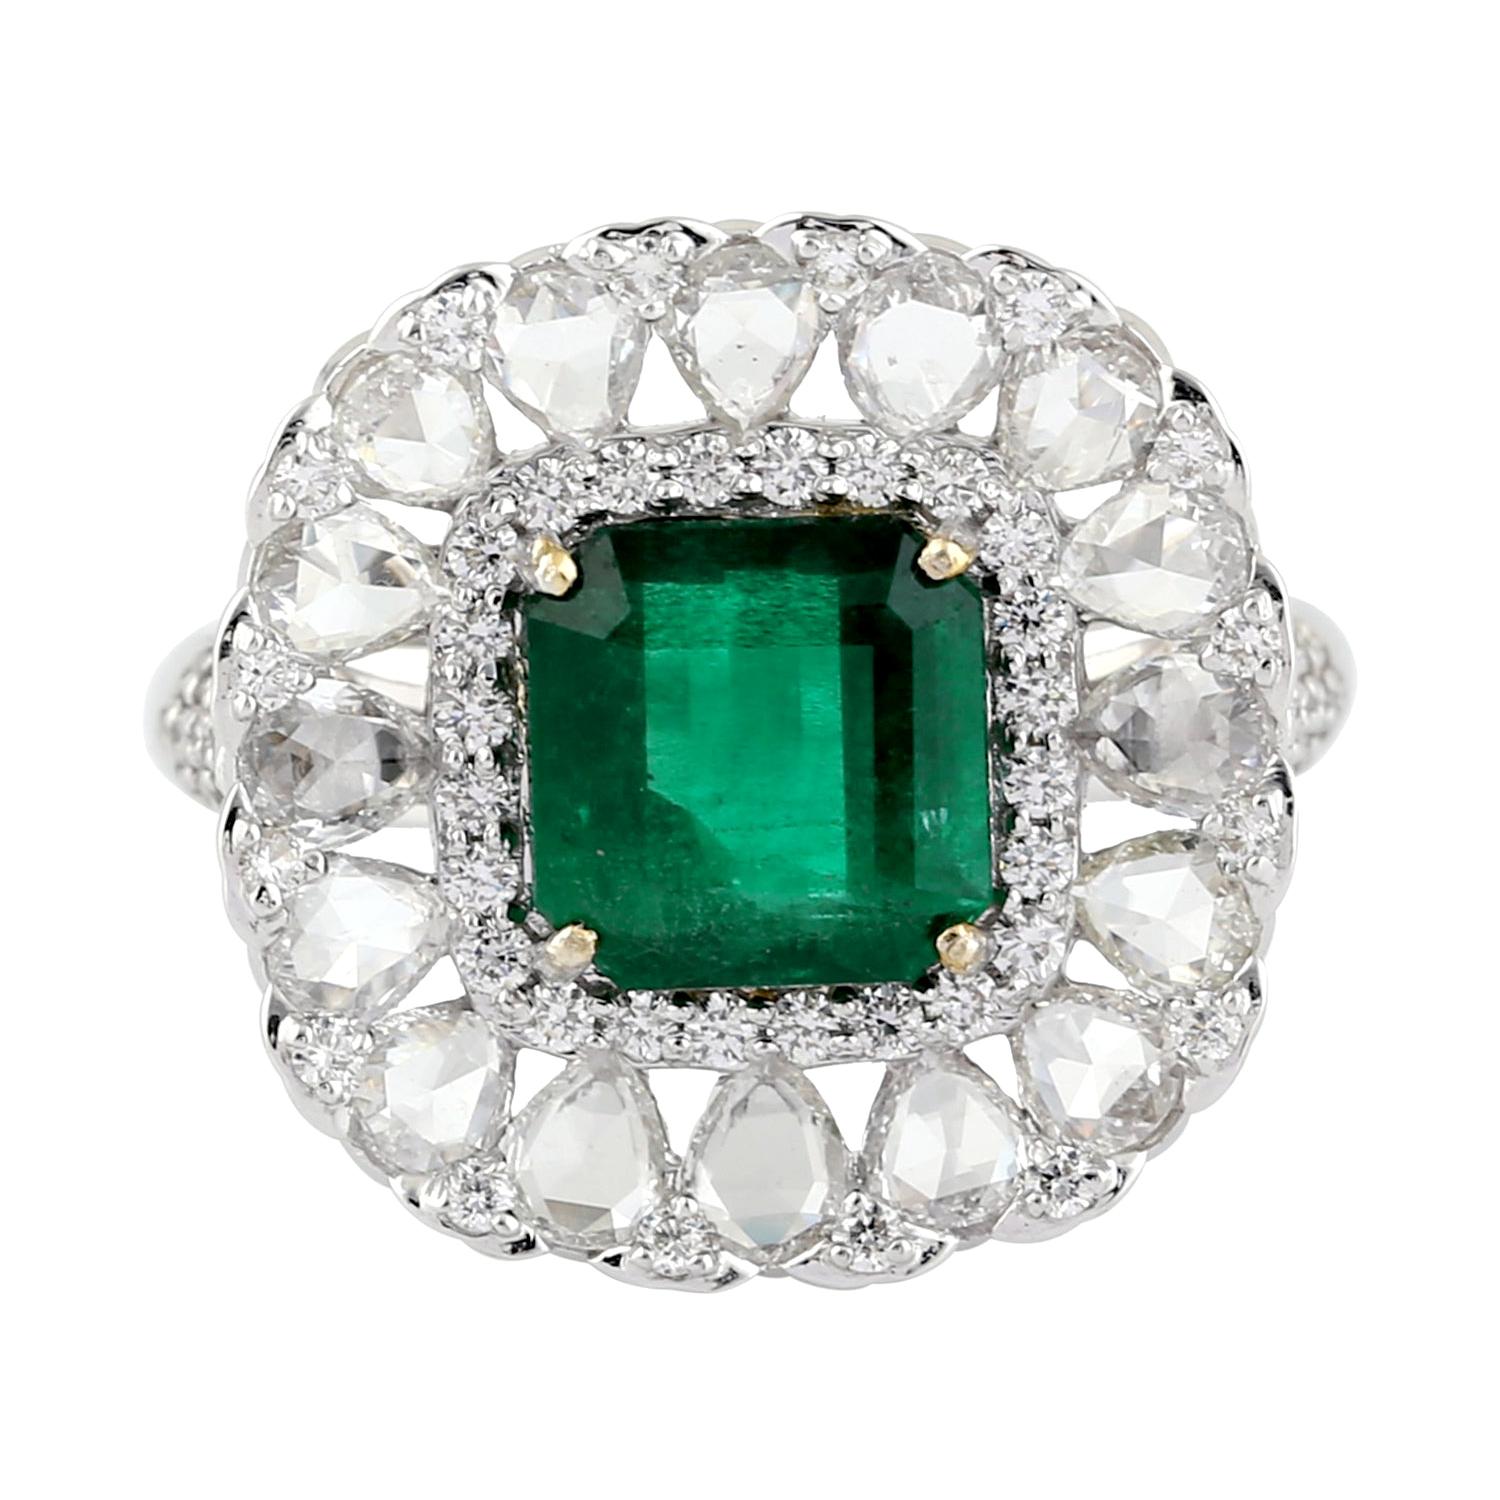 Princess Cut Emerald Ring with Diamonds Around in 18K White Gold